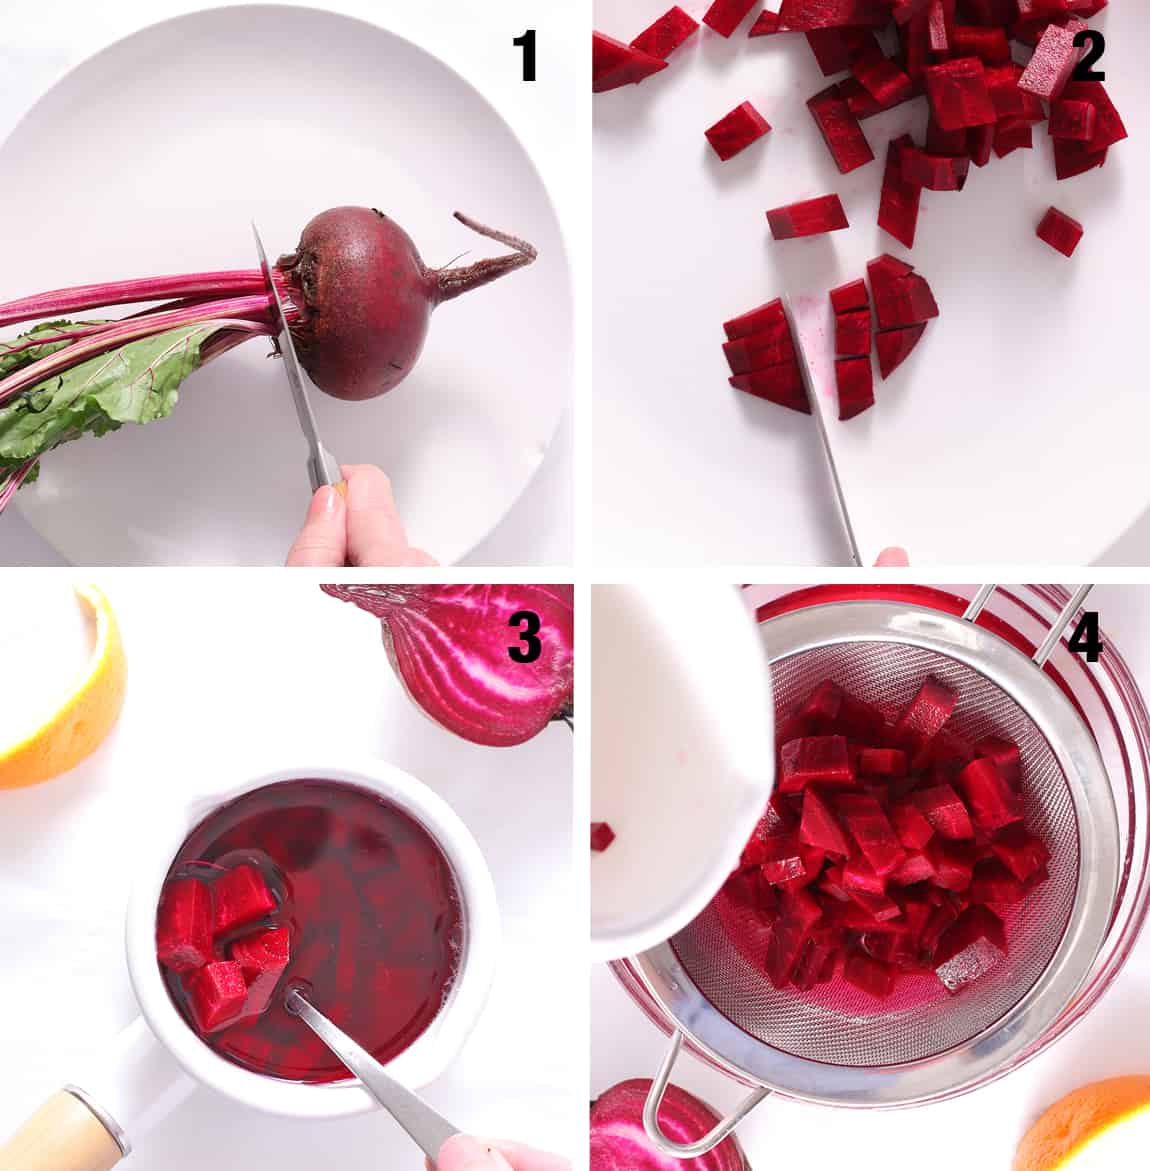 steps to prepare beets for beet juice.